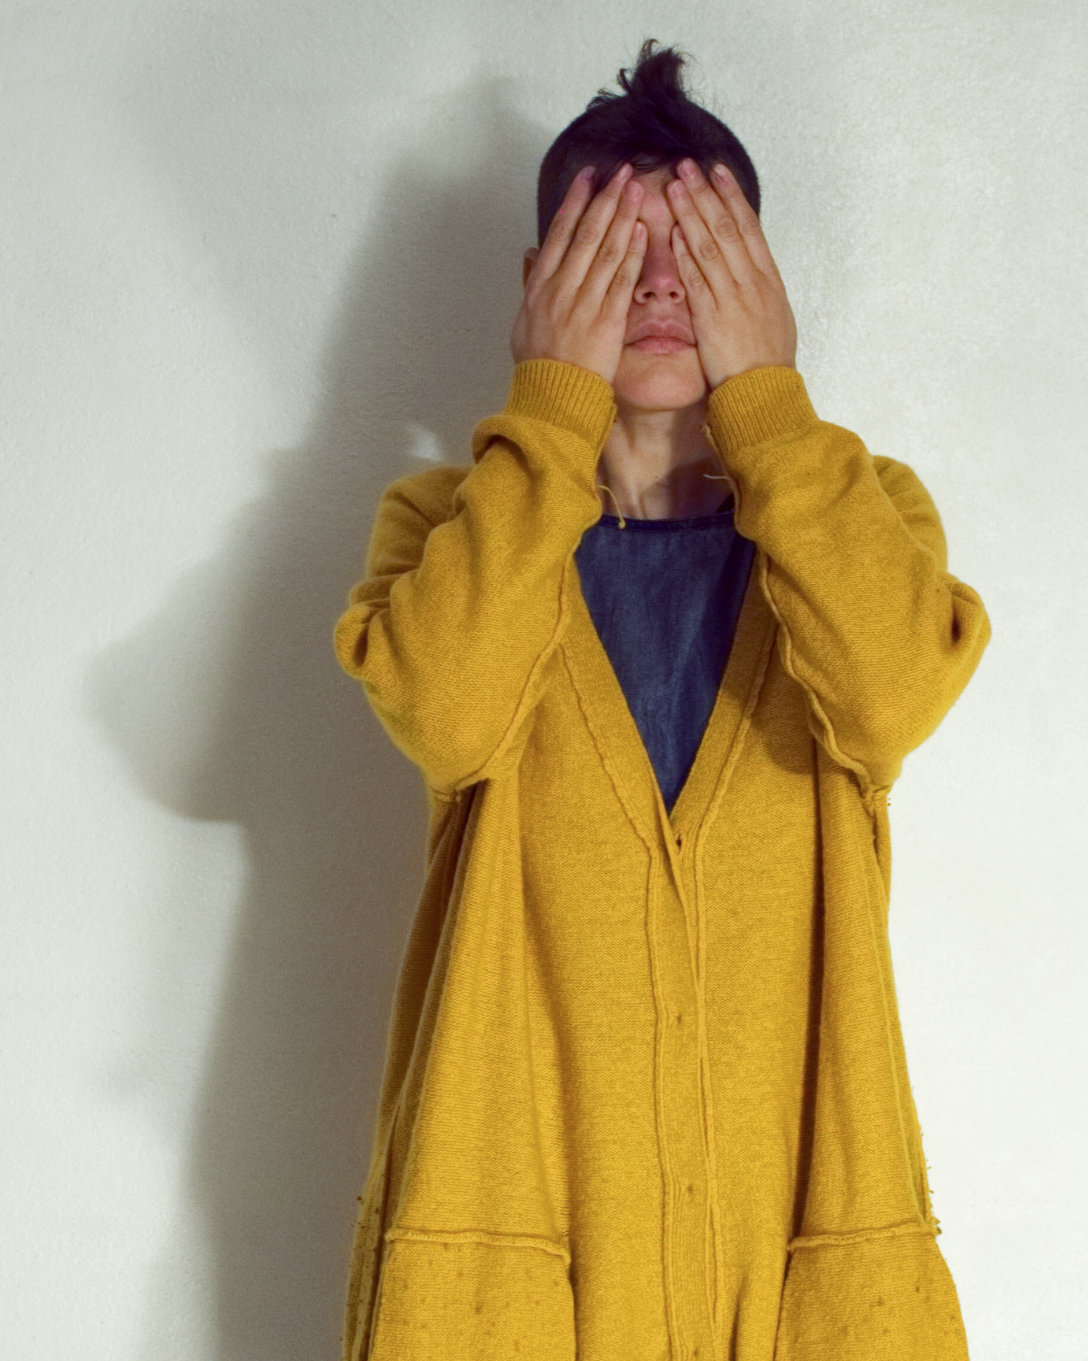 Model wear a yellow long cardigan while covering their eyes